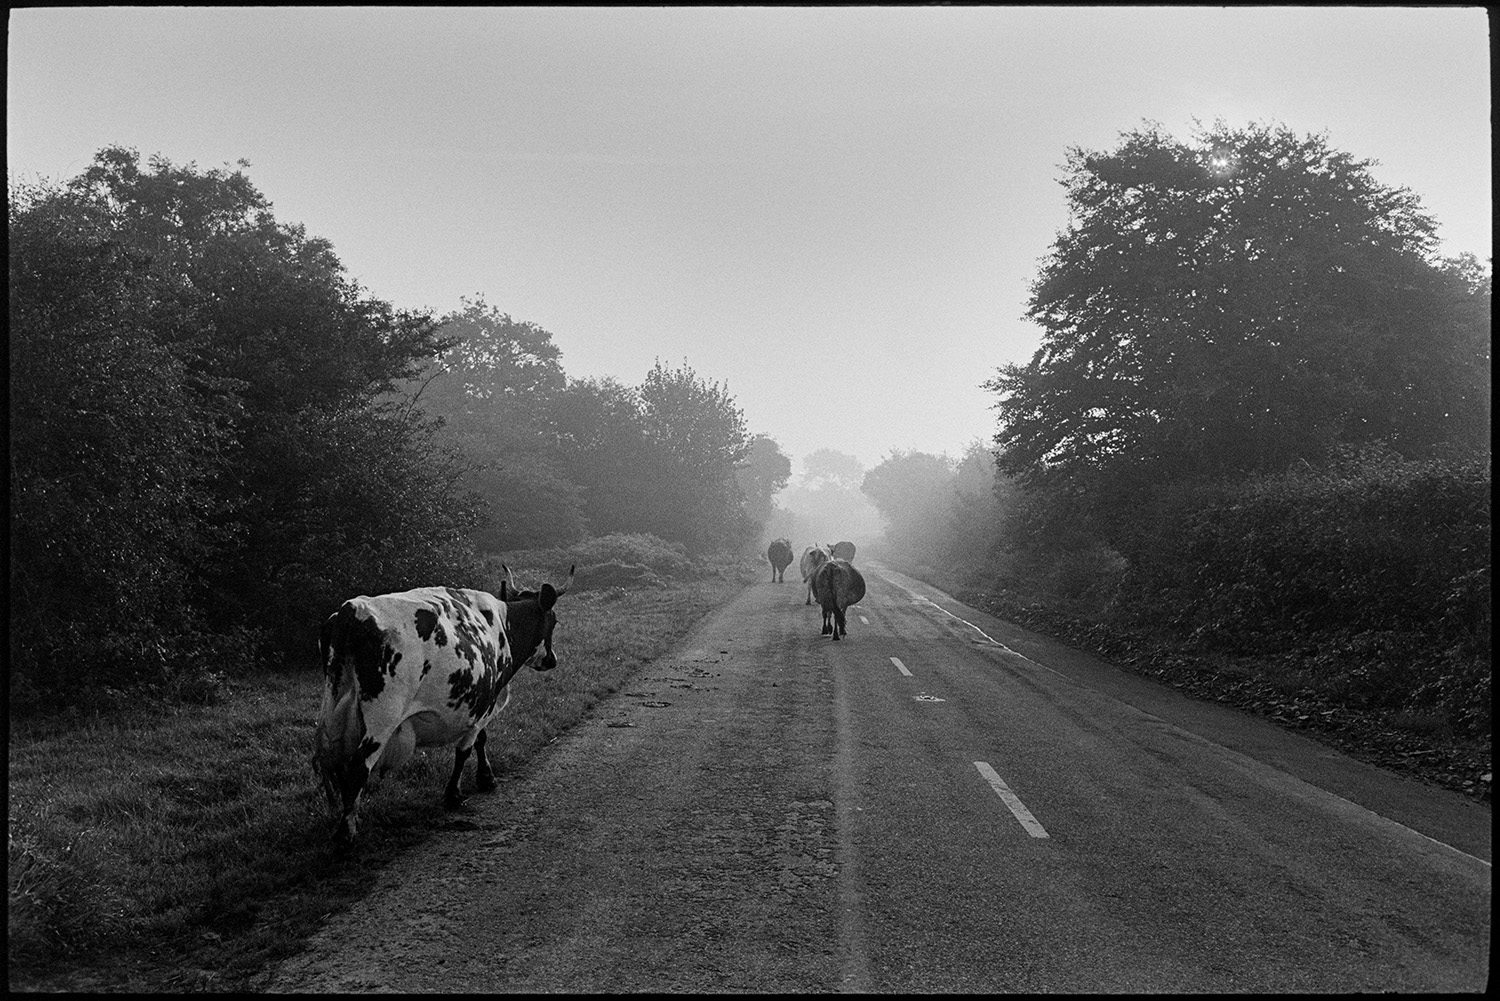 Farmer driving cows in road going to milked. Early morning.
[Cows with horns walking down a road in early morning mist at Cuppers Piece, Beaford.]